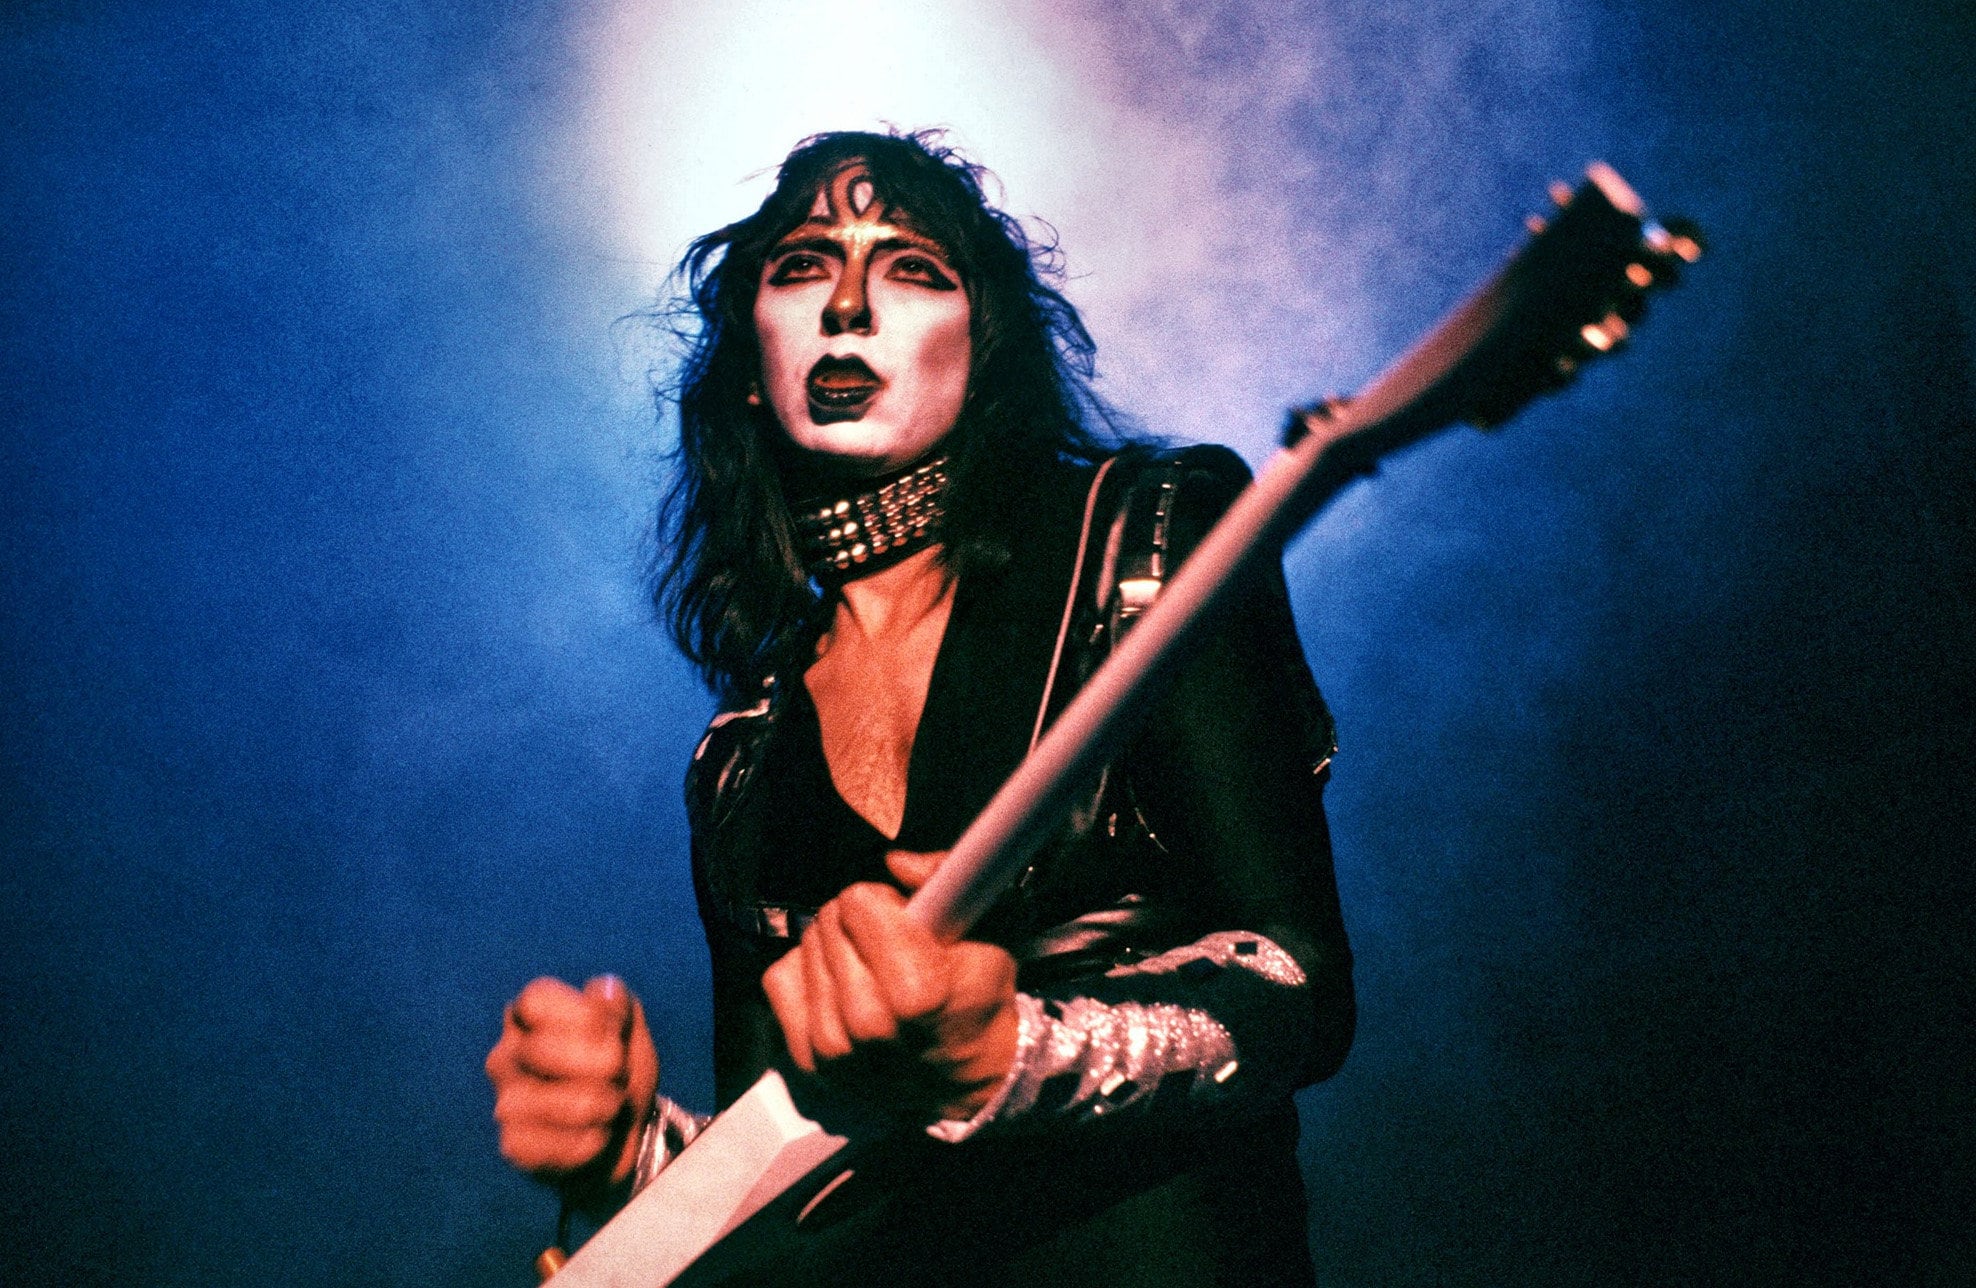 Vinnie Vincent is hired as new guitarist in Kiss 23. September 1982